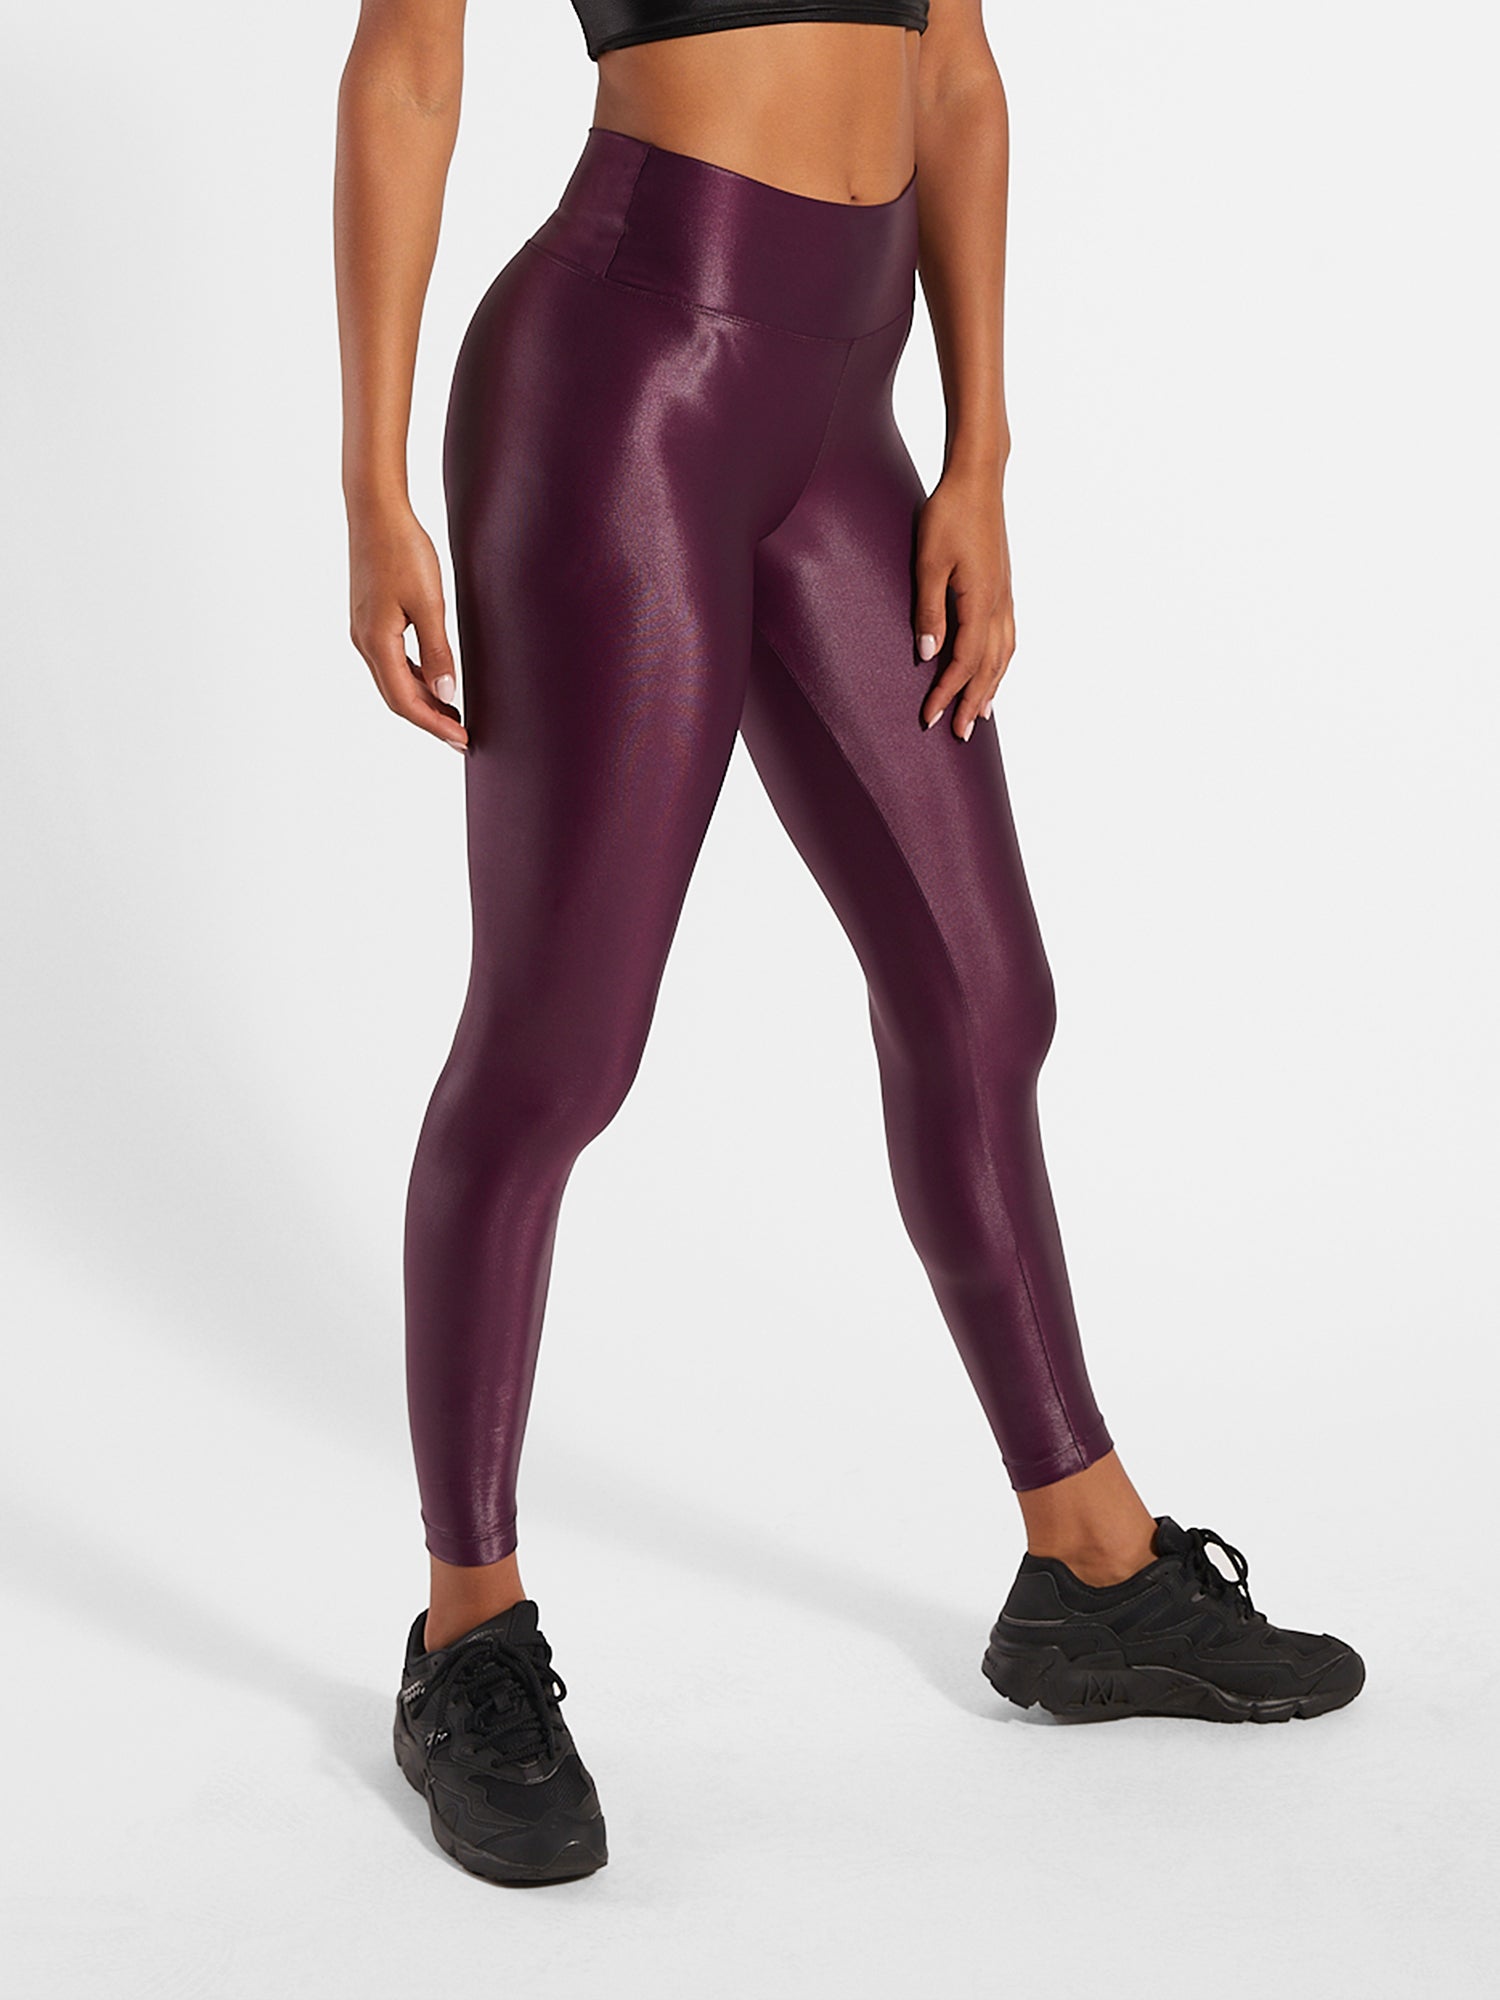 12 Best Compression Leggings for All Kinds of Workouts